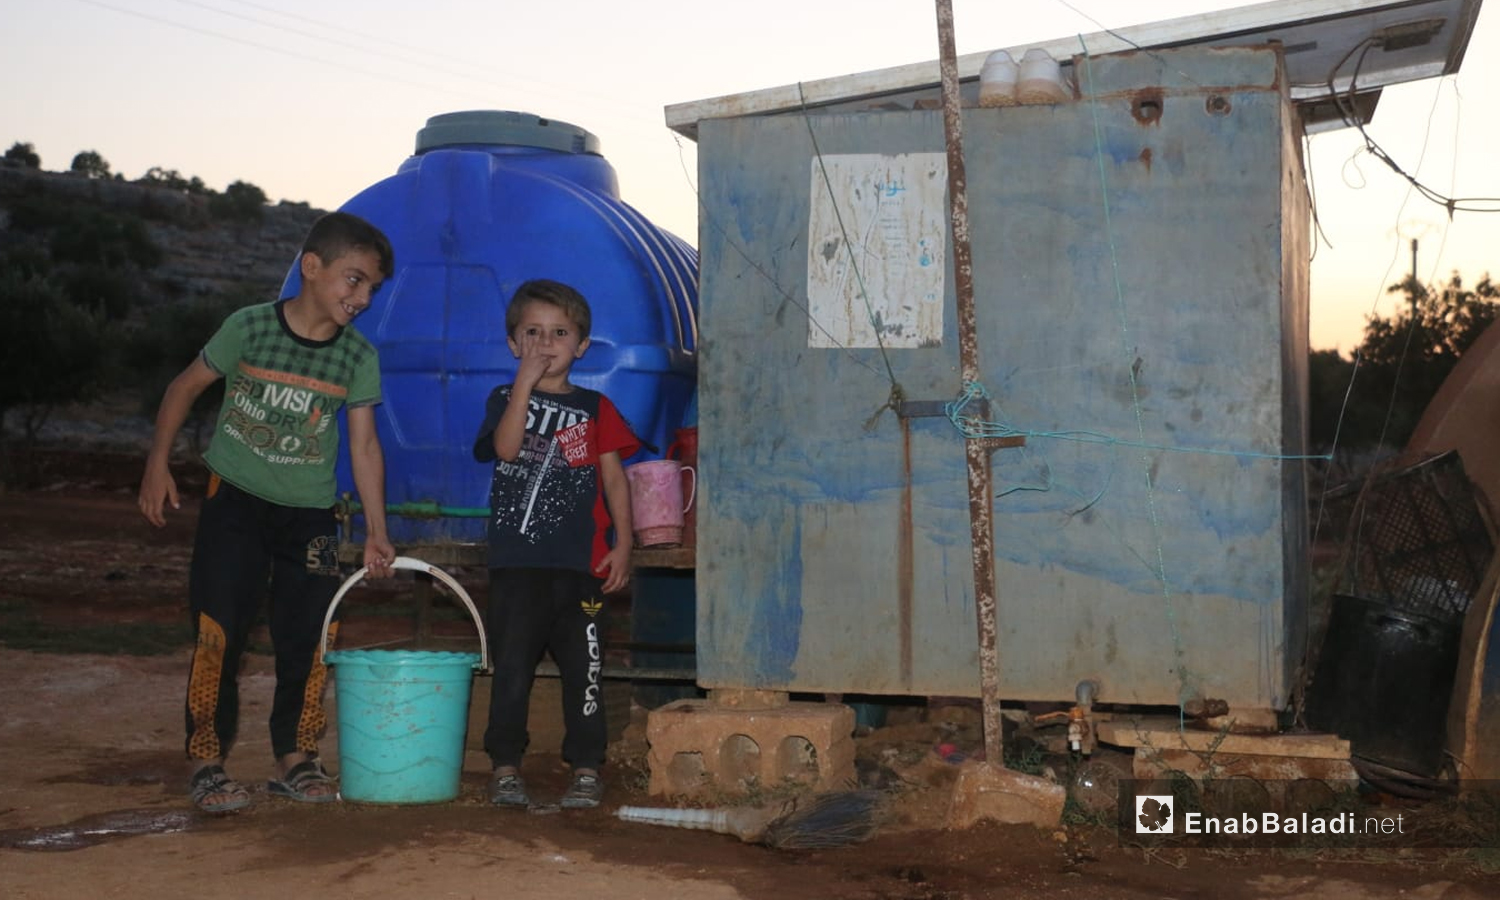 Syrian children in front of water tanks in an IDP camp in the eastern countryside of Idlib city- 21 June 2021 (Enab Baladi)